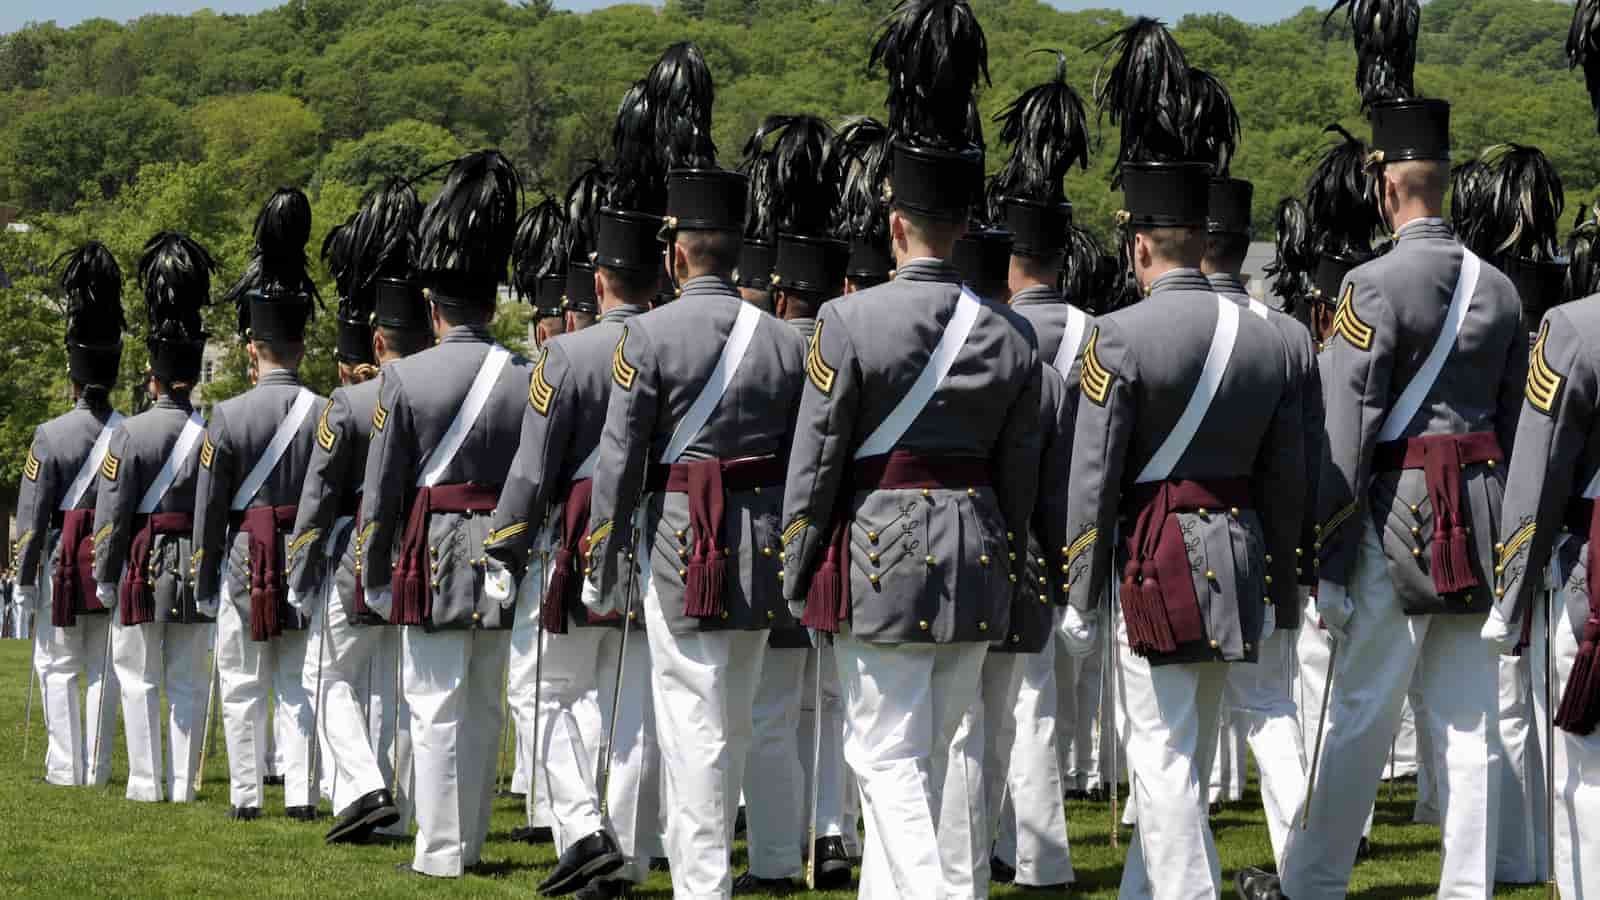 The Fascinating History of Marching Bands